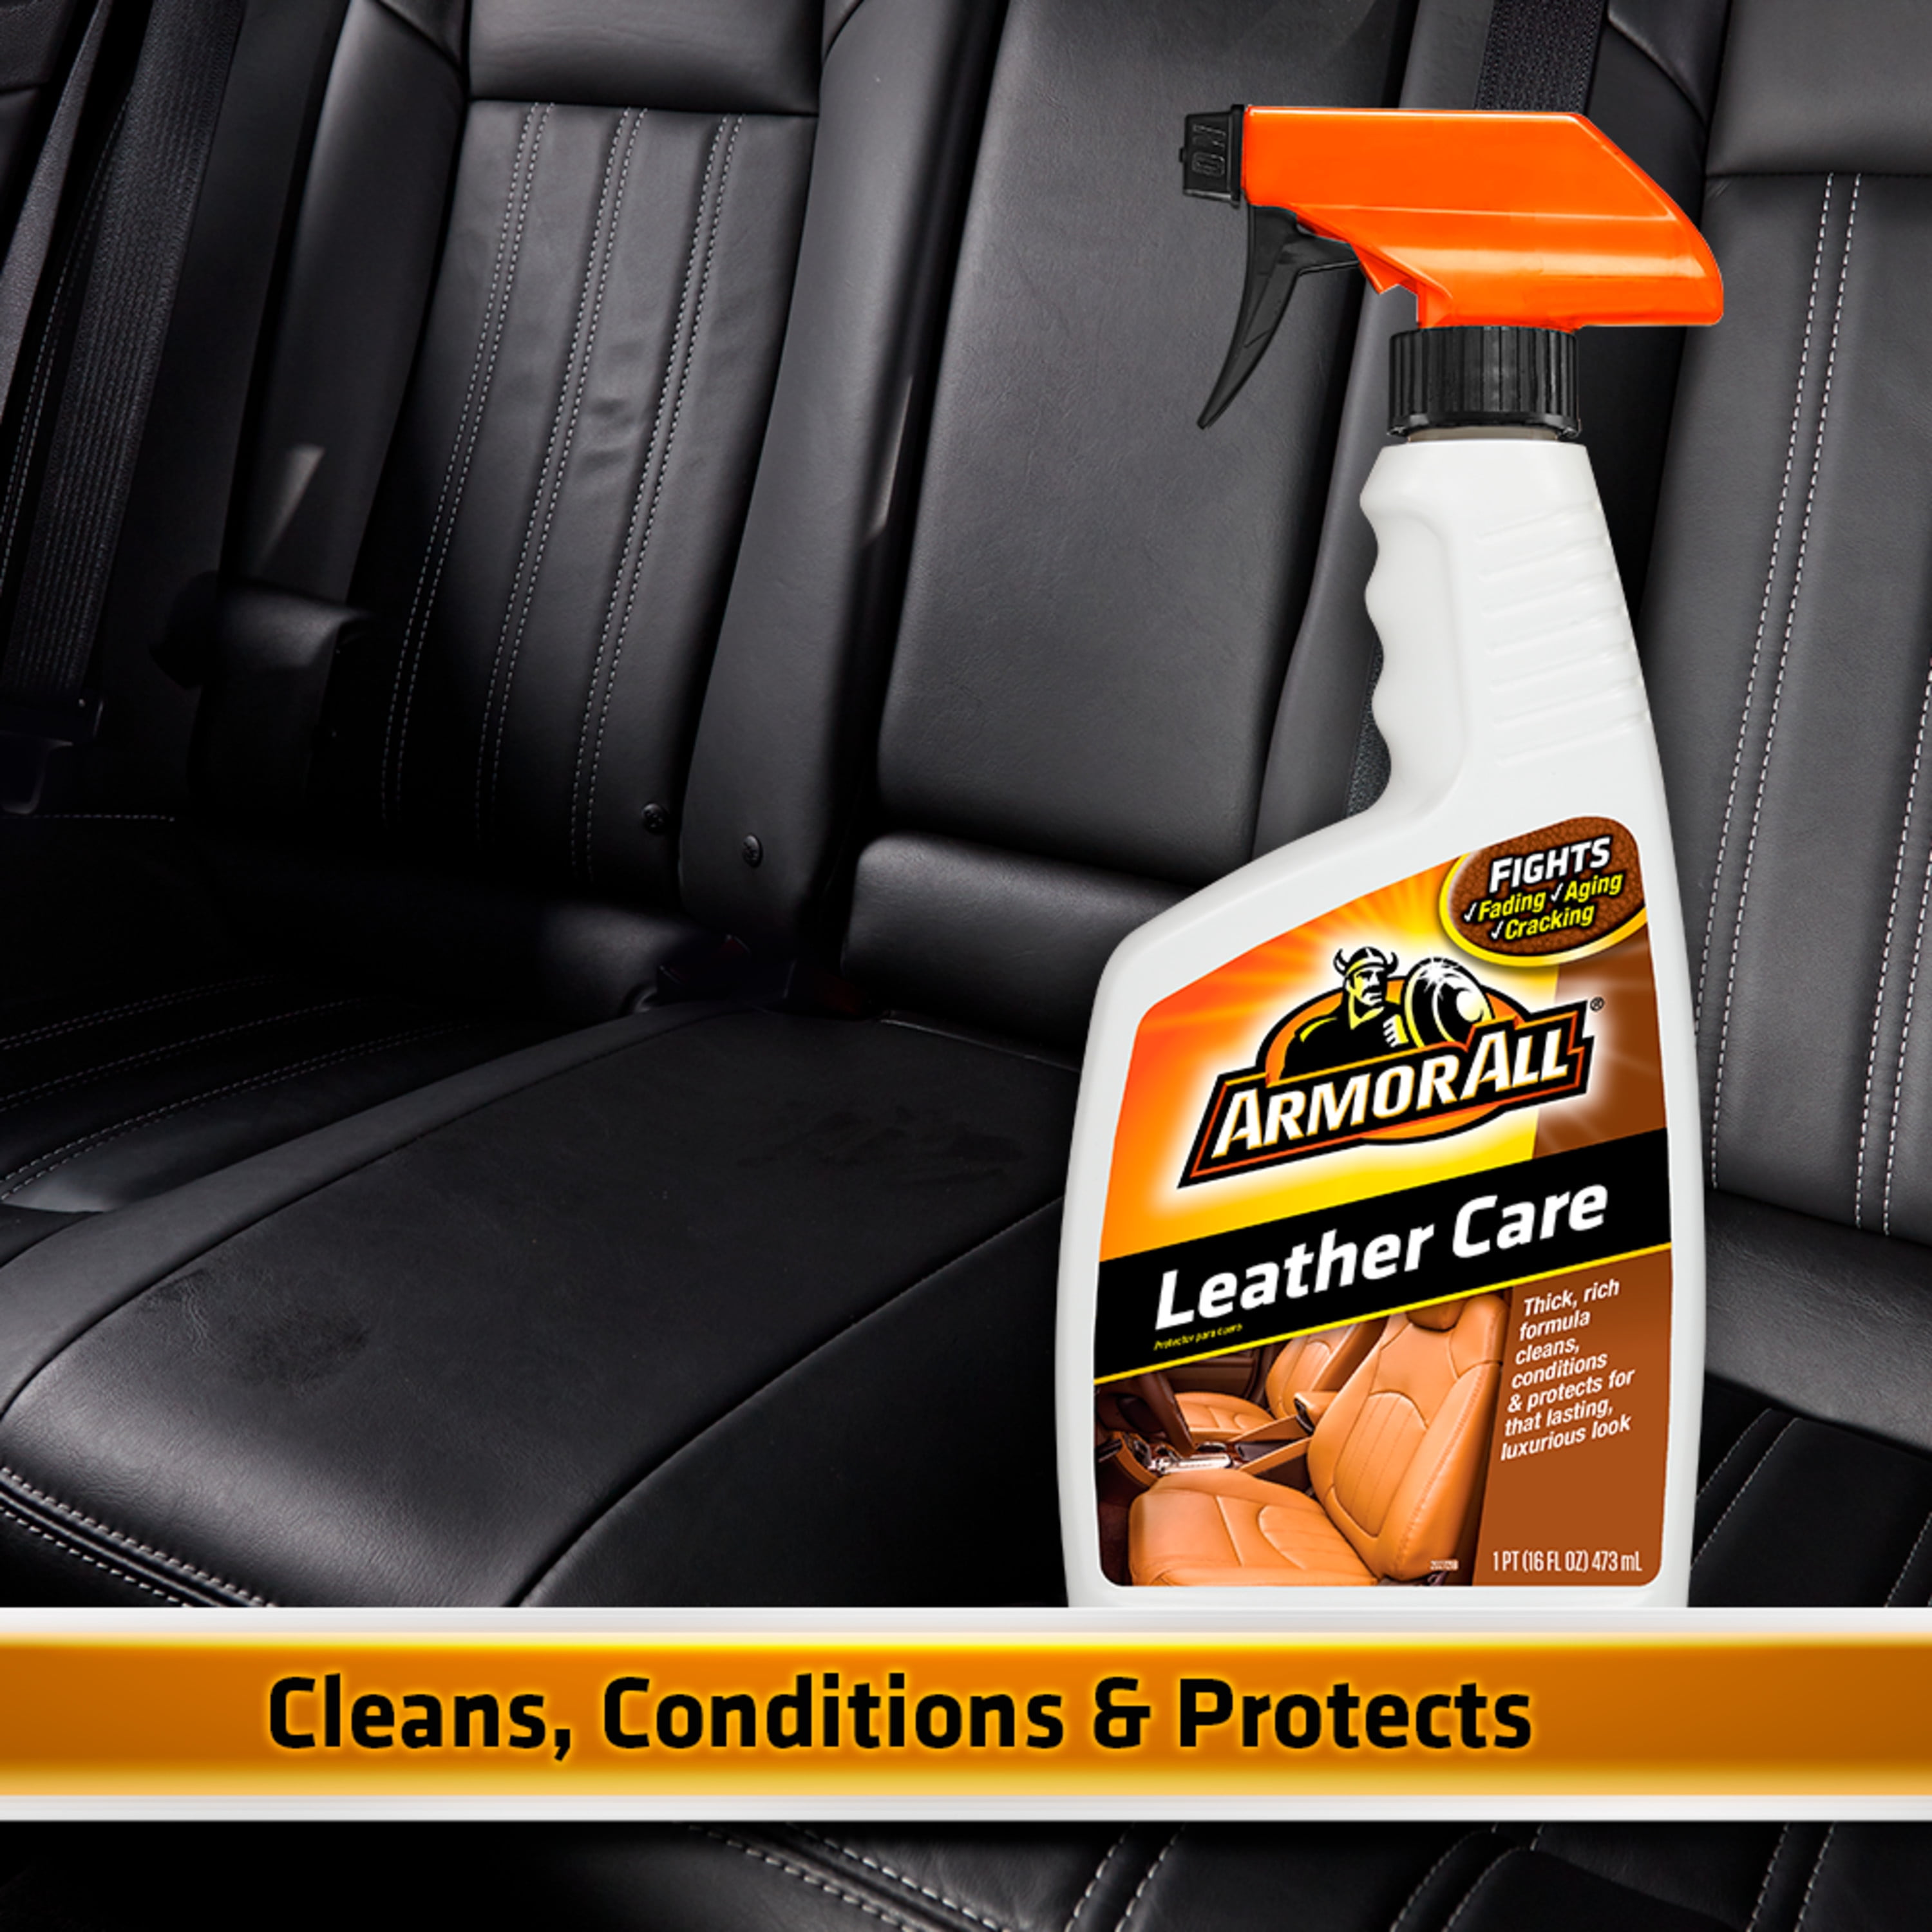 SHINE ARMOR Leather Cleaner & Conditioner Protector for Couches Car  Interior Apparel Furniture and Deicer Spray for Car Windshield Windows  Wipers and